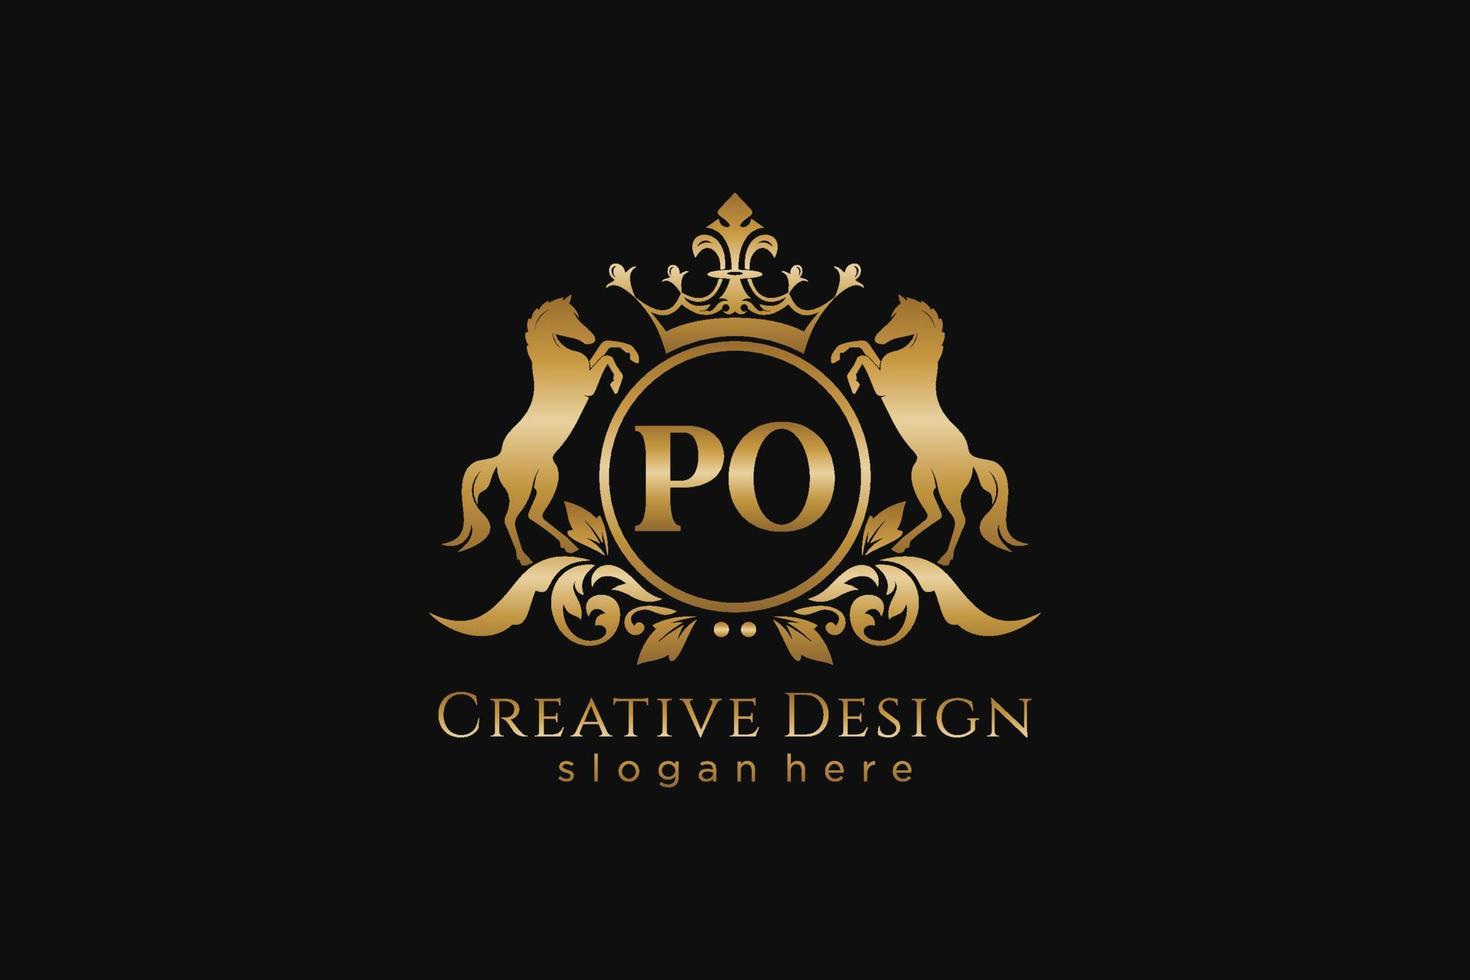 initial PO Retro golden crest with circle and two horses, badge template with scrolls and royal crown - perfect for luxurious branding projects vector